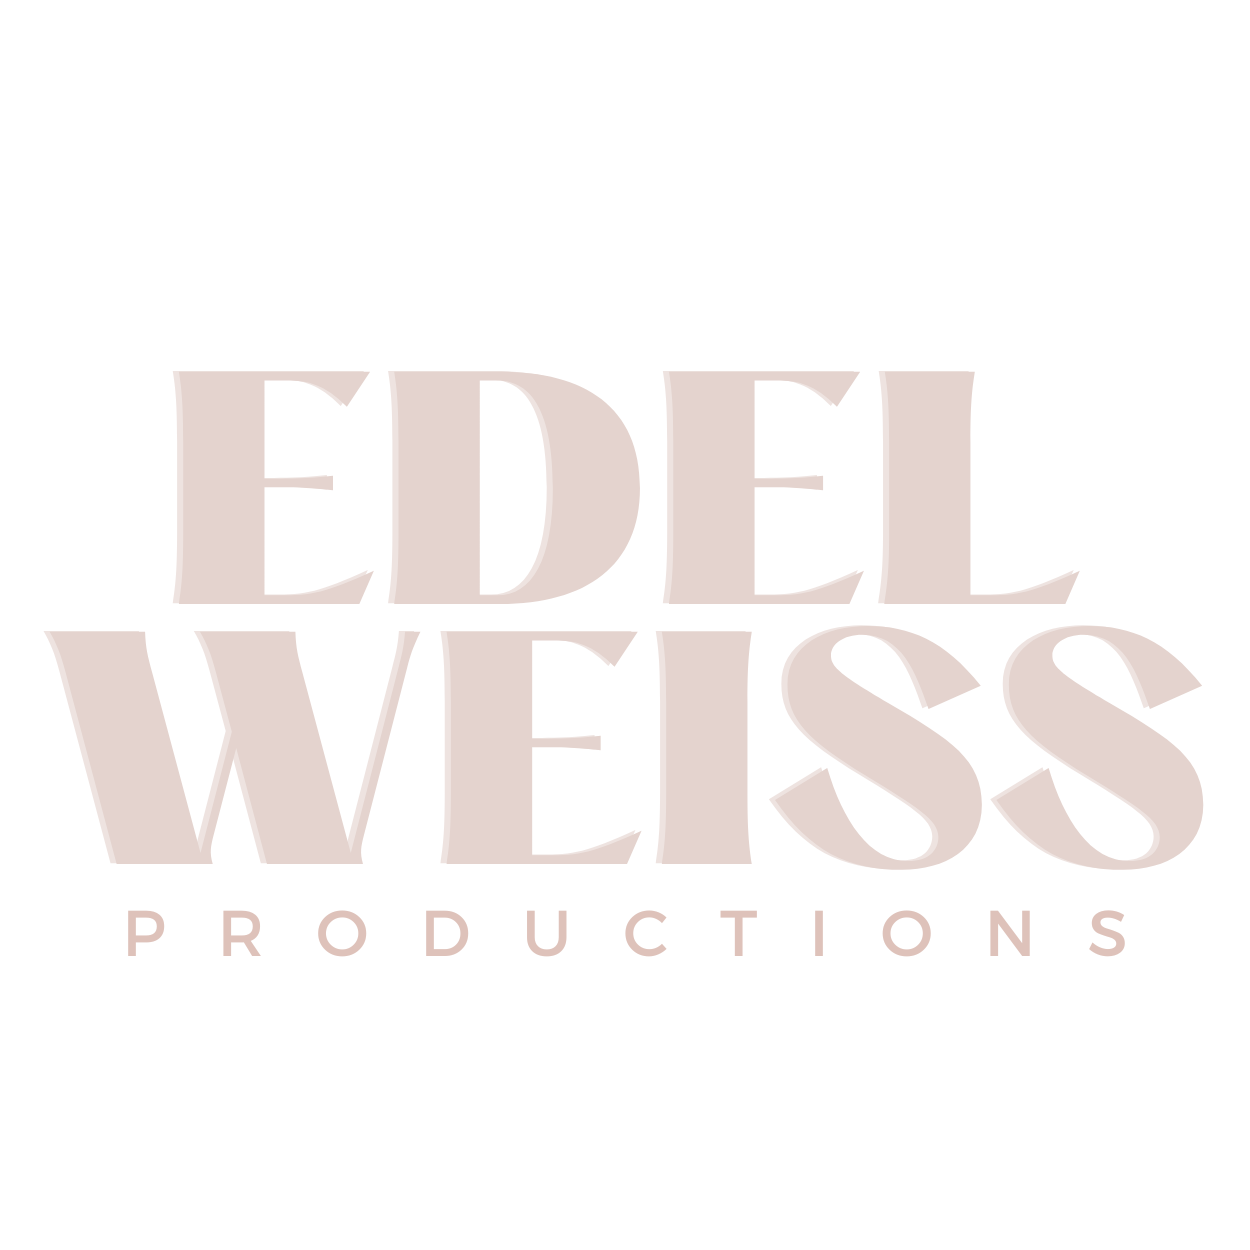 Edelweiss Productions